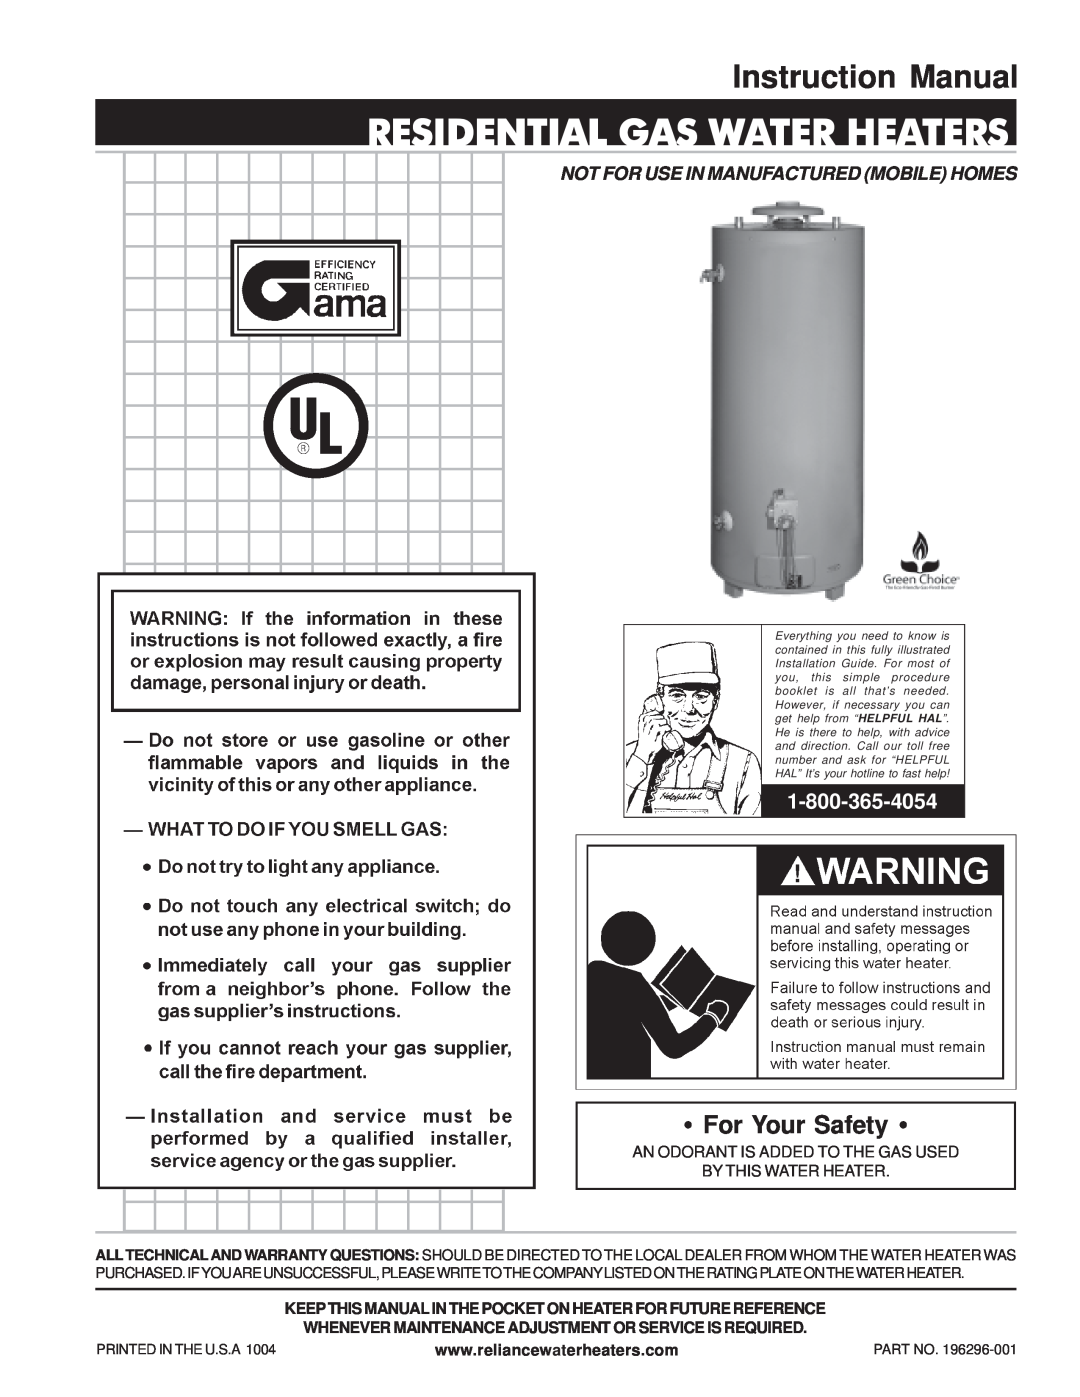 Reliance Water Heaters 606 Series, 196296-001 instruction manual Residential Gas Water Heaters, For Your Safety 